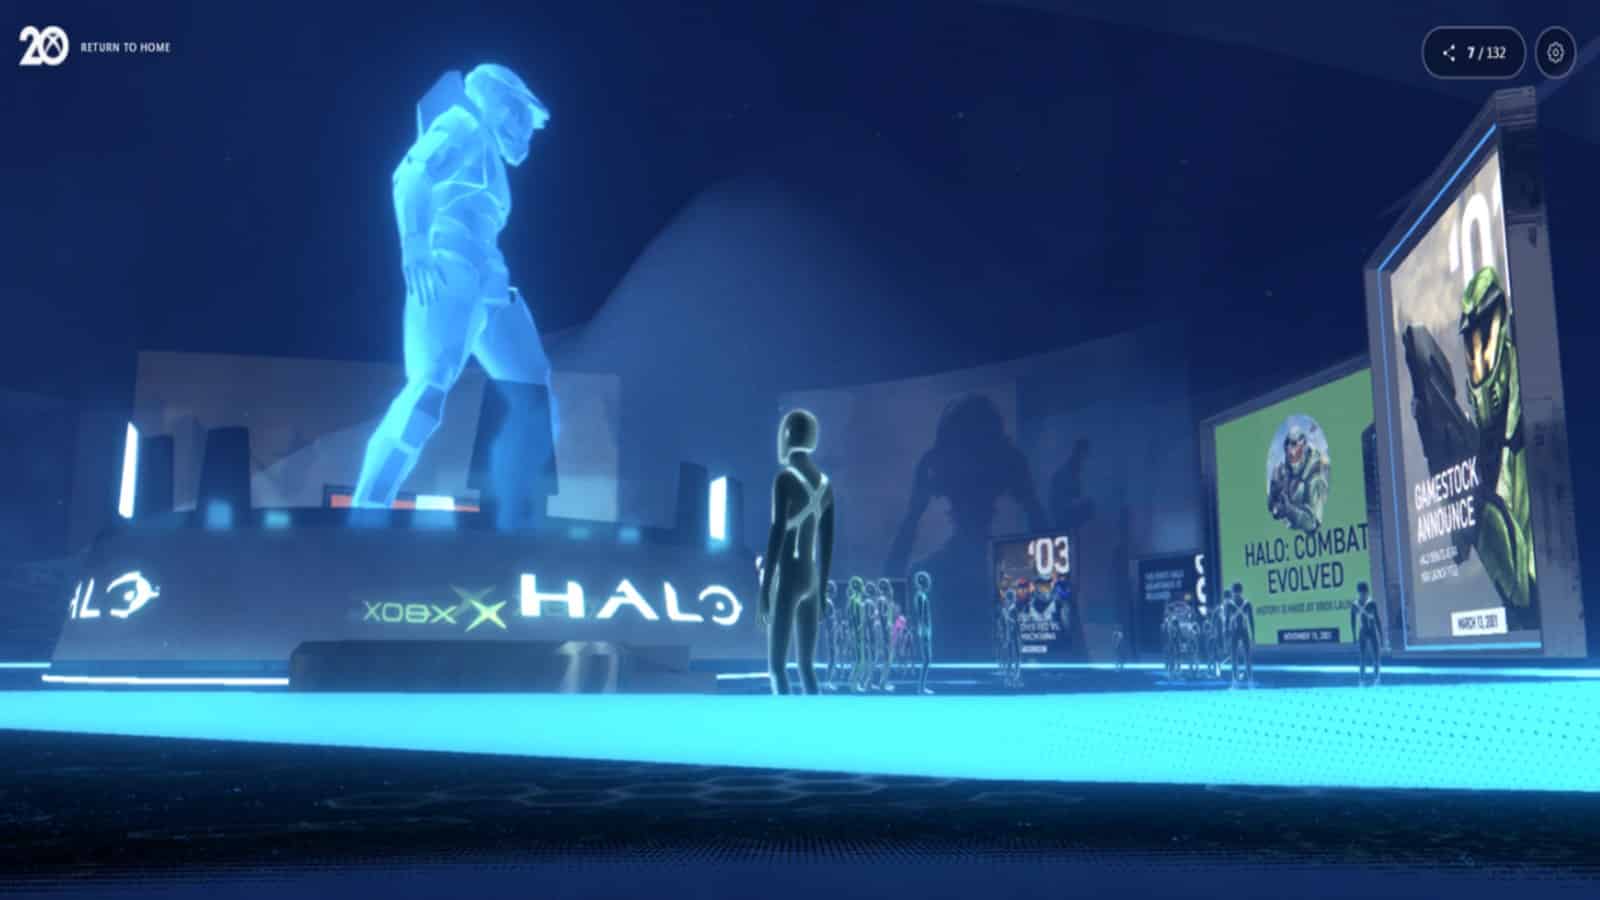 The MAster Chief display in Xbox's new 20th Anniversary Museum feature